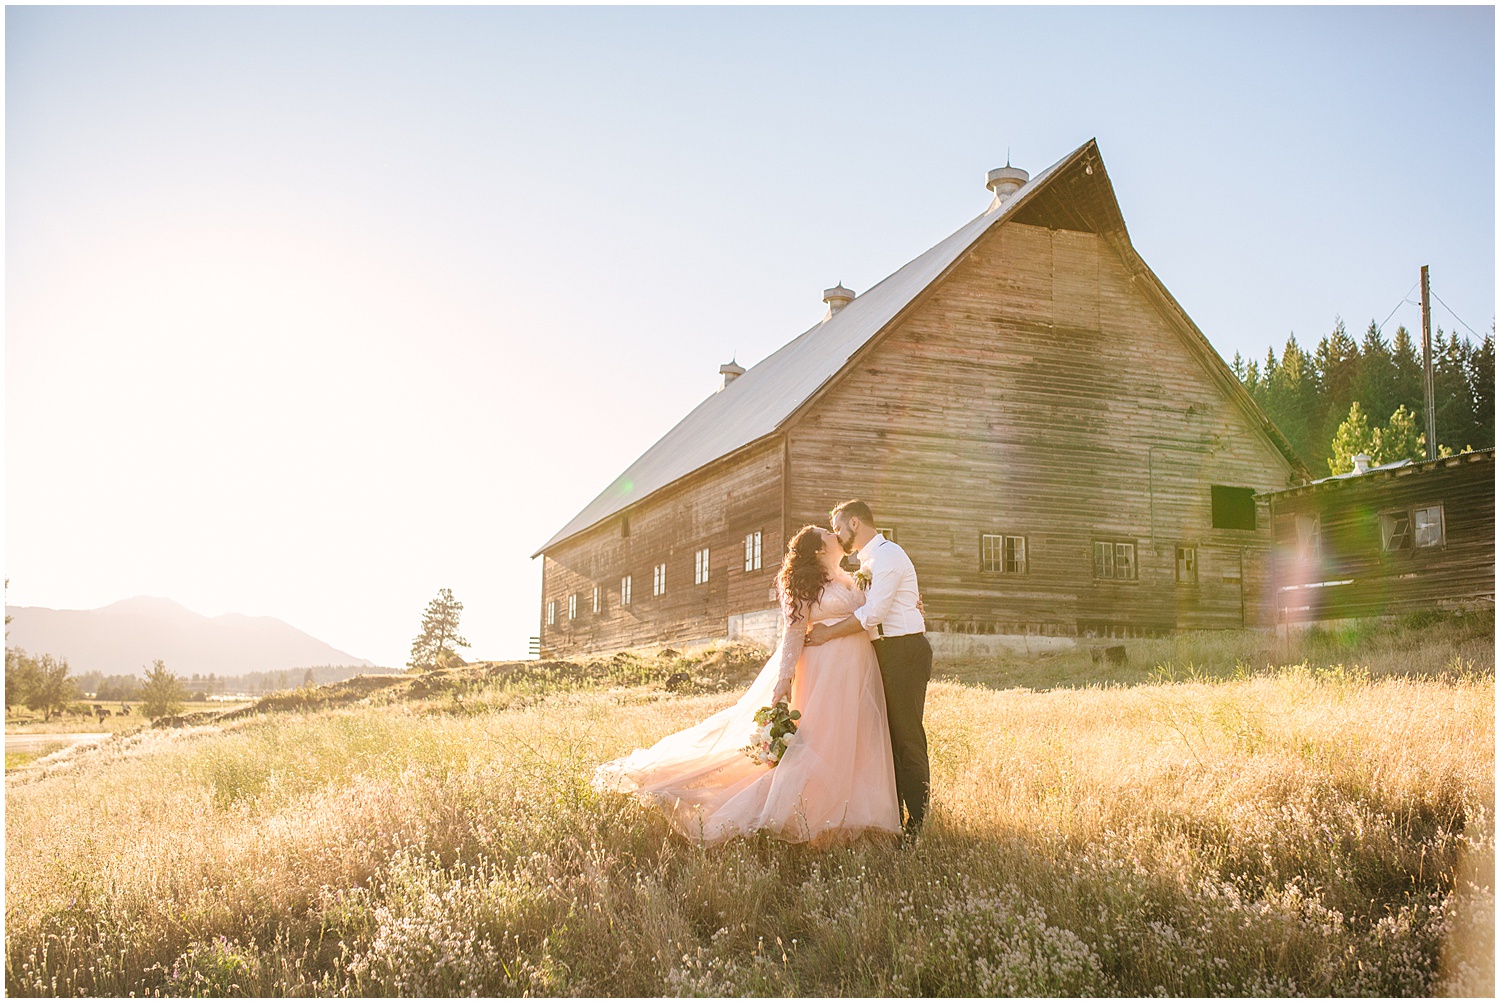 7 things to consider when searching for your wedding photographer - Denver wedding photographer